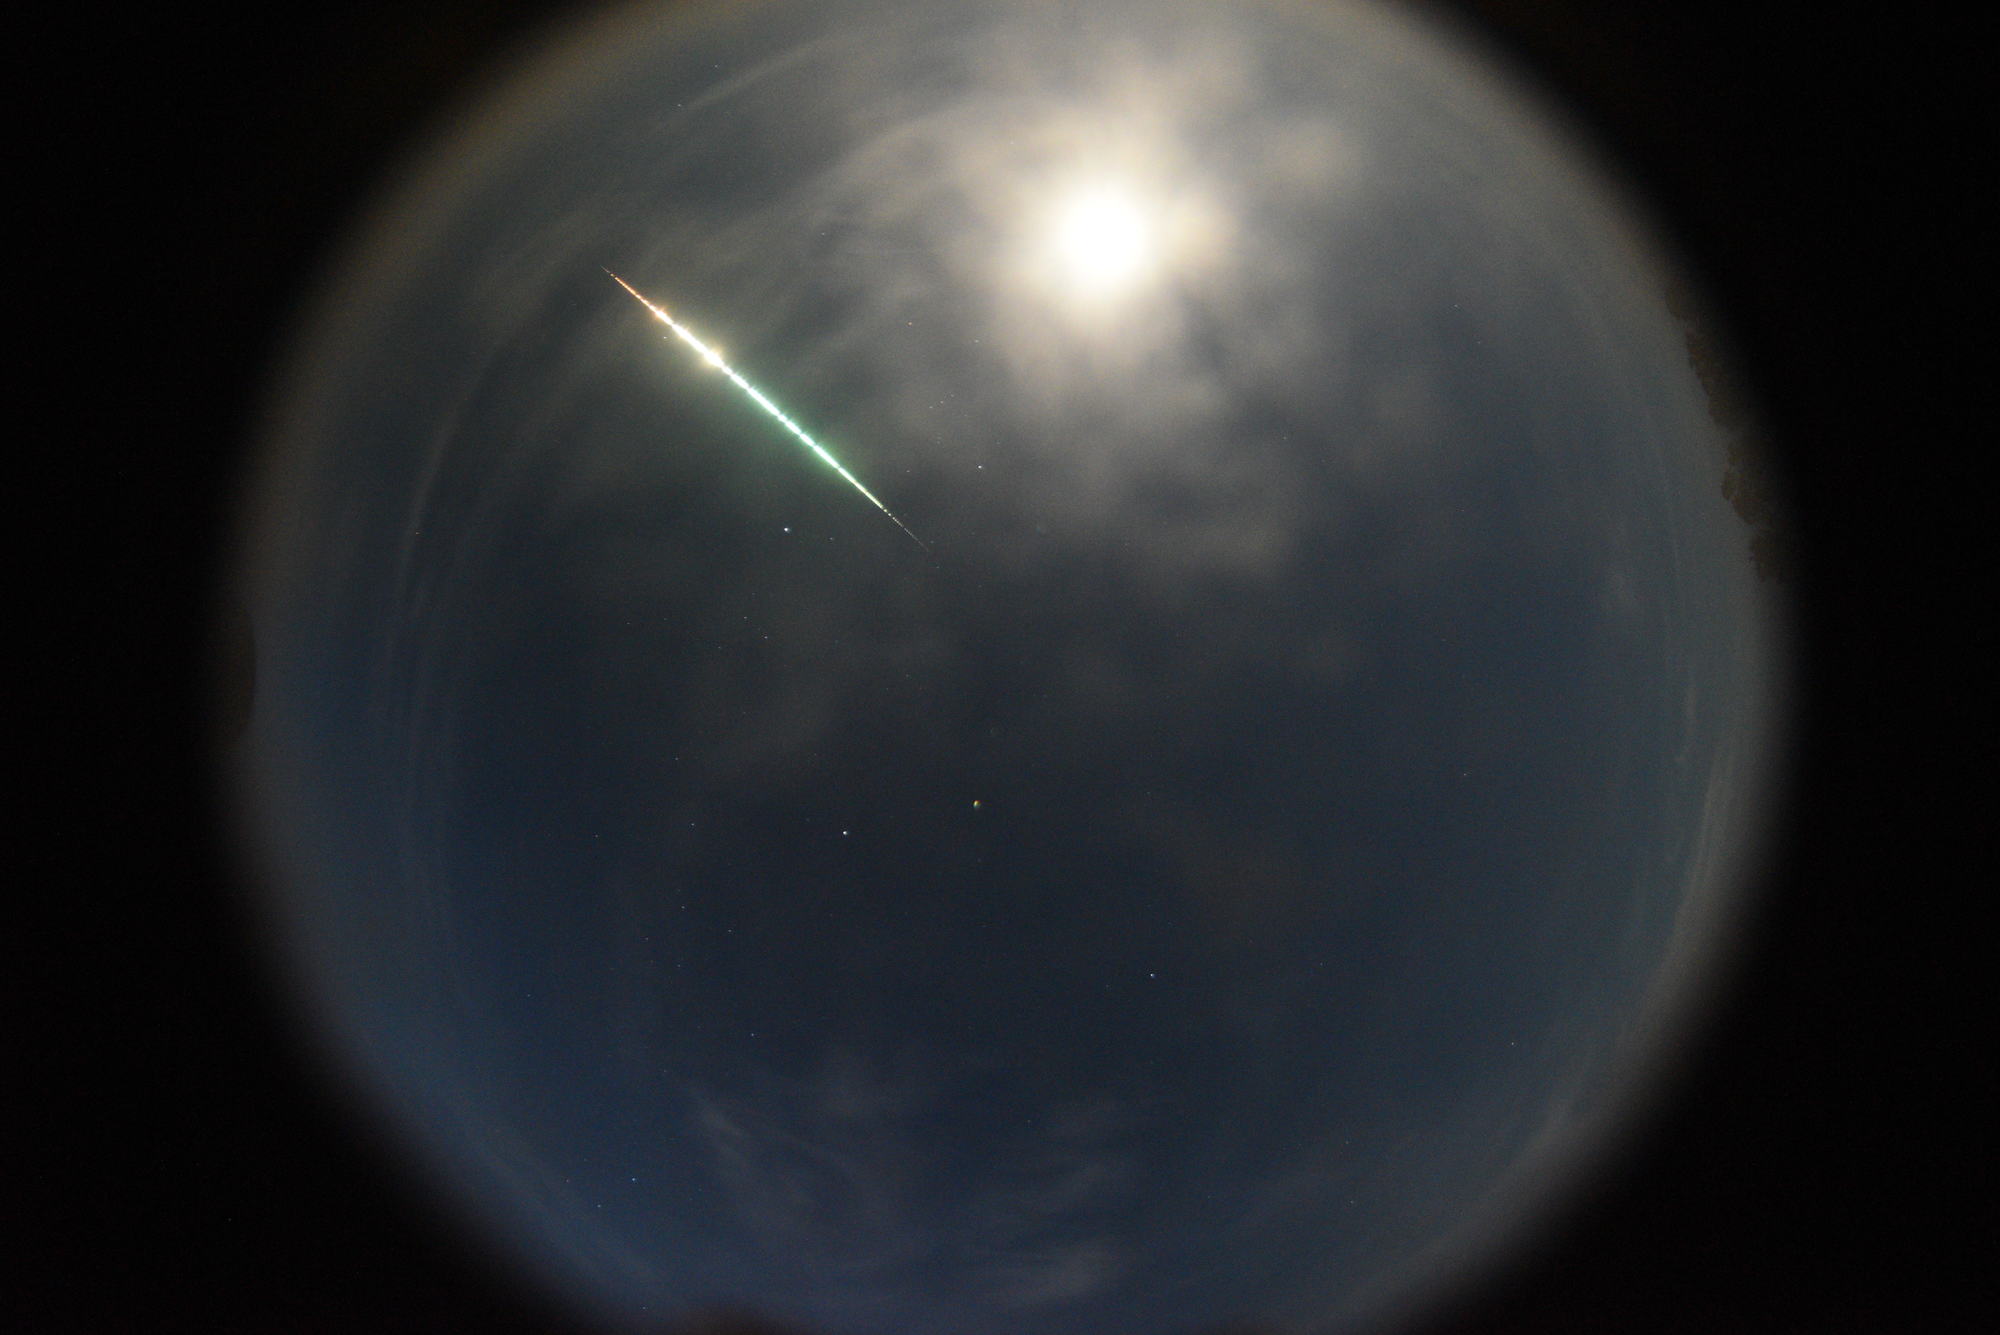 All-sky photo of the fireball captured by the Boorowa camera system.